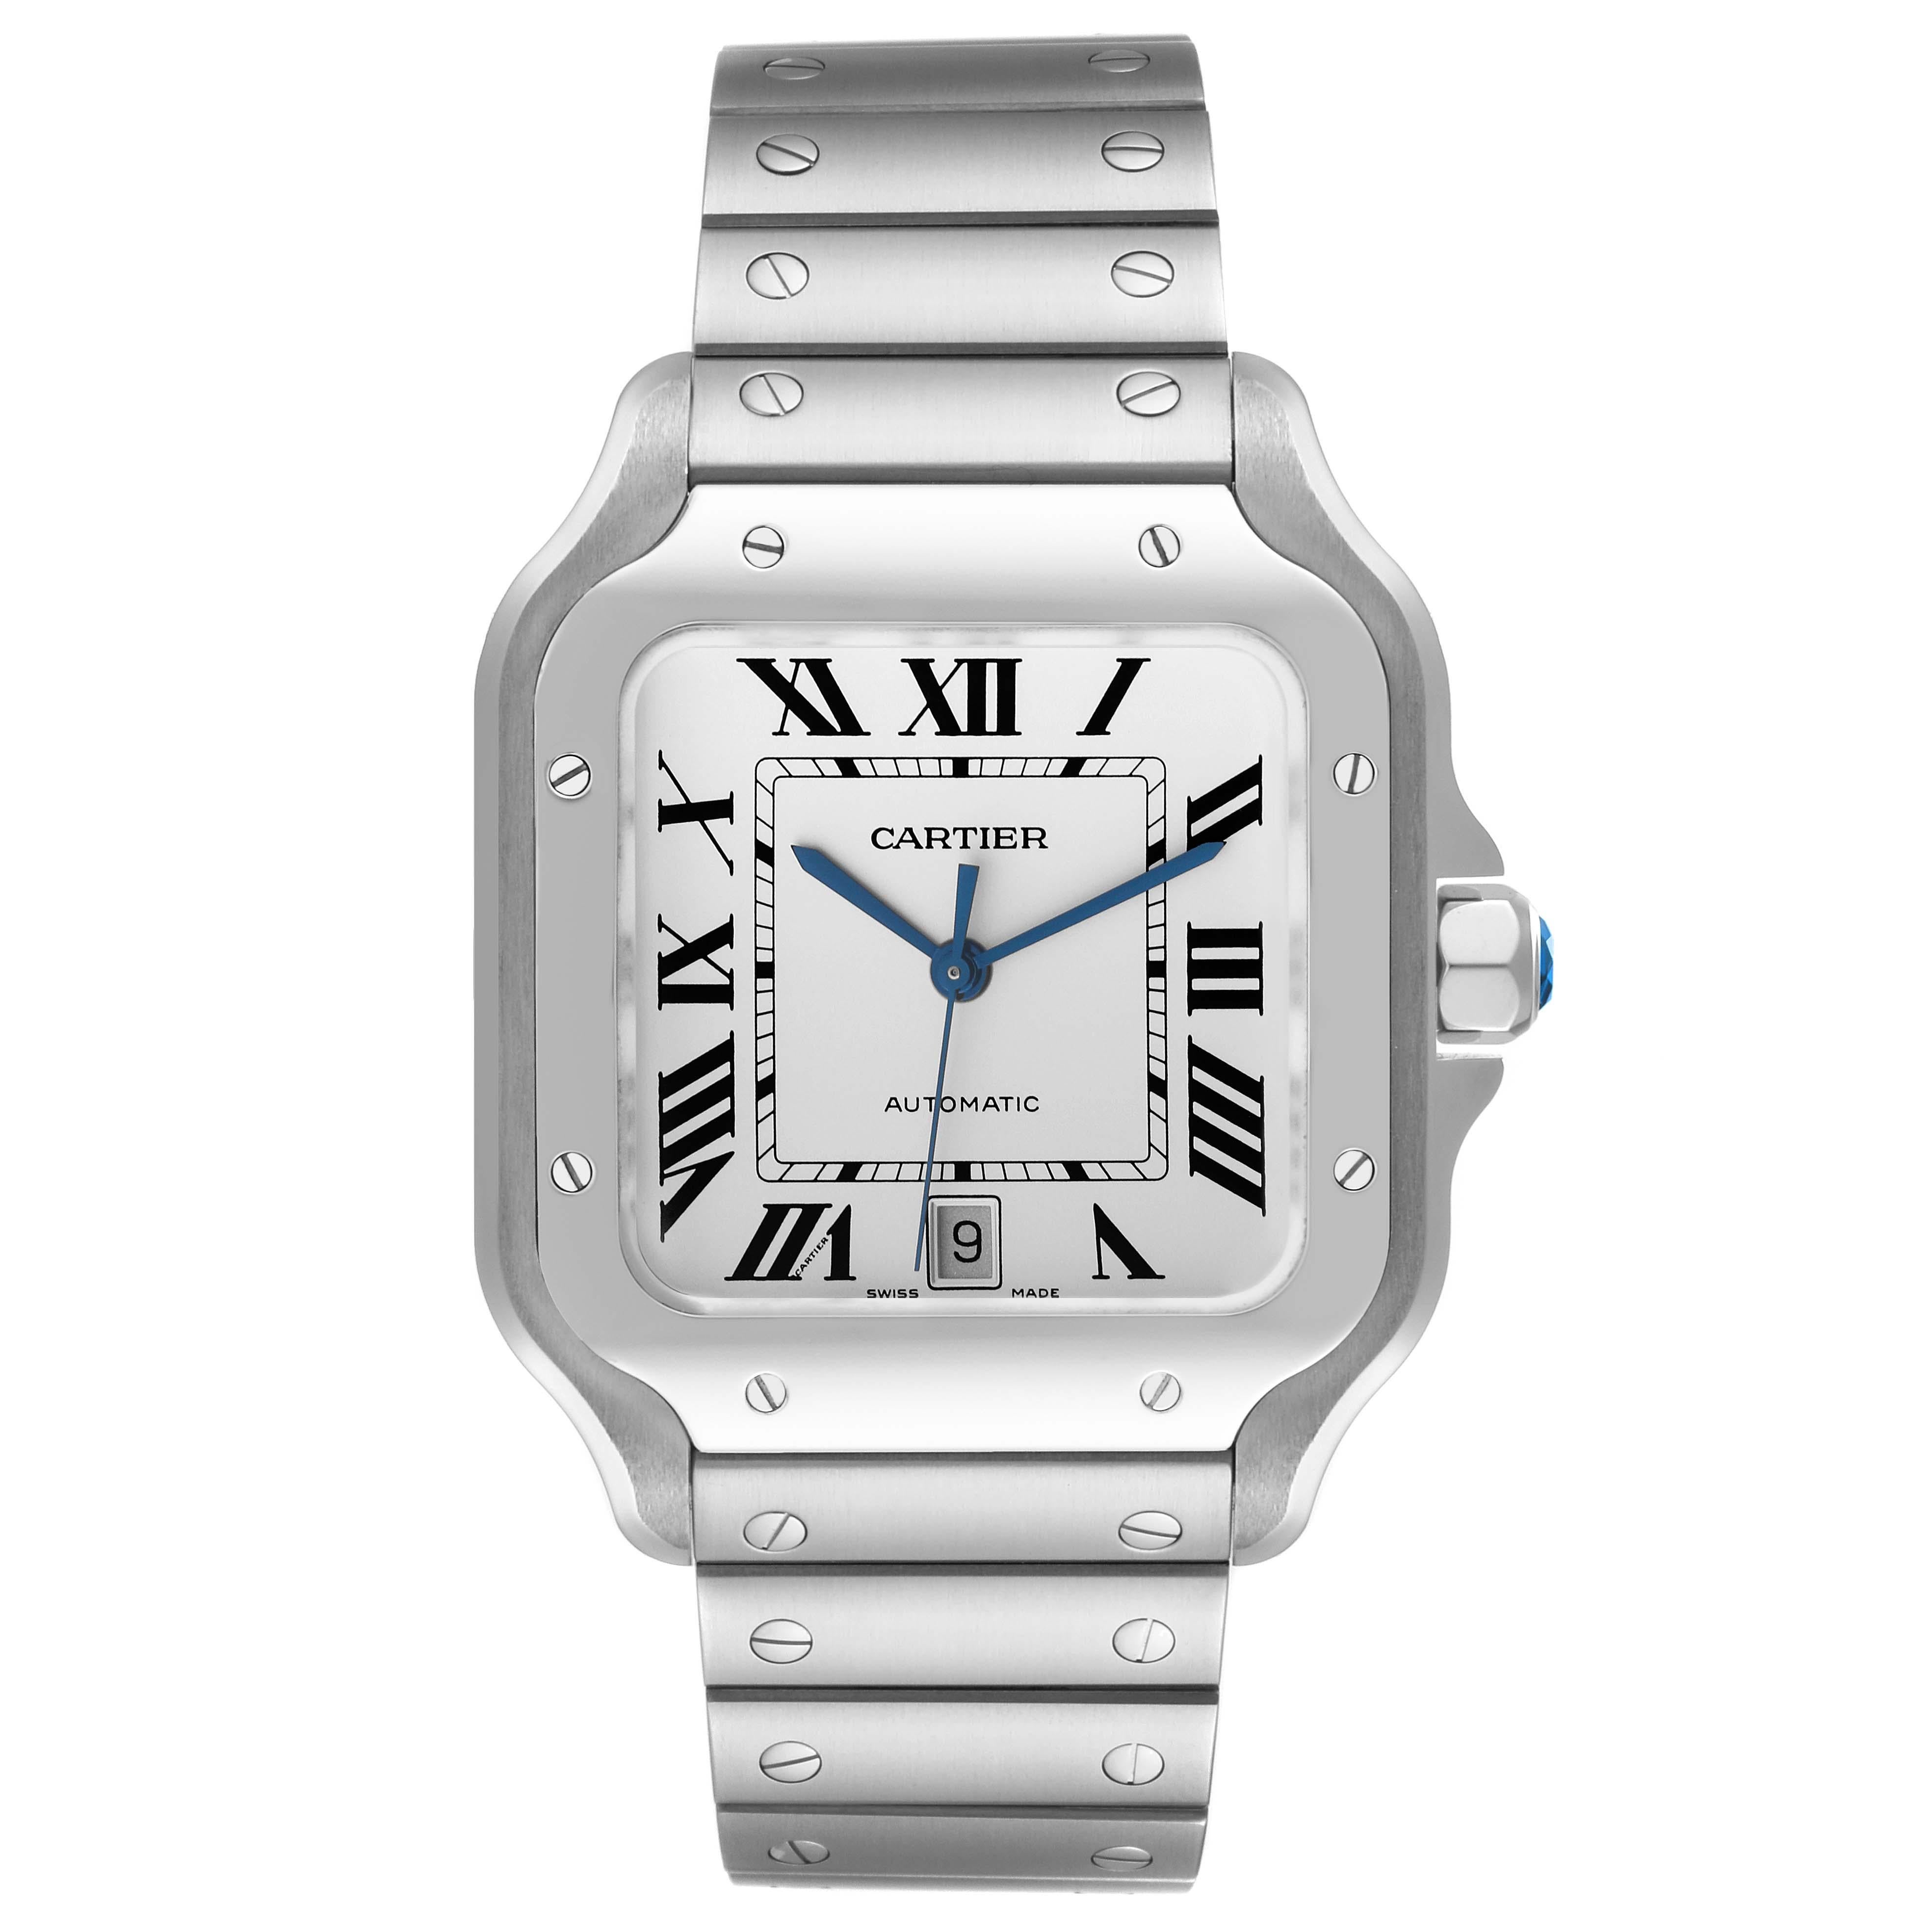 Cartier Santos Large Silver Dial Steel Mens Watch WSSA0018 Box Card. Automatic self-winding movement. Stainless steel case 39.8 x 47.5 mm.  Octagonal crown set with the faceted blue spinel. Stainless steel bezel punctuated with 8 signature screws.